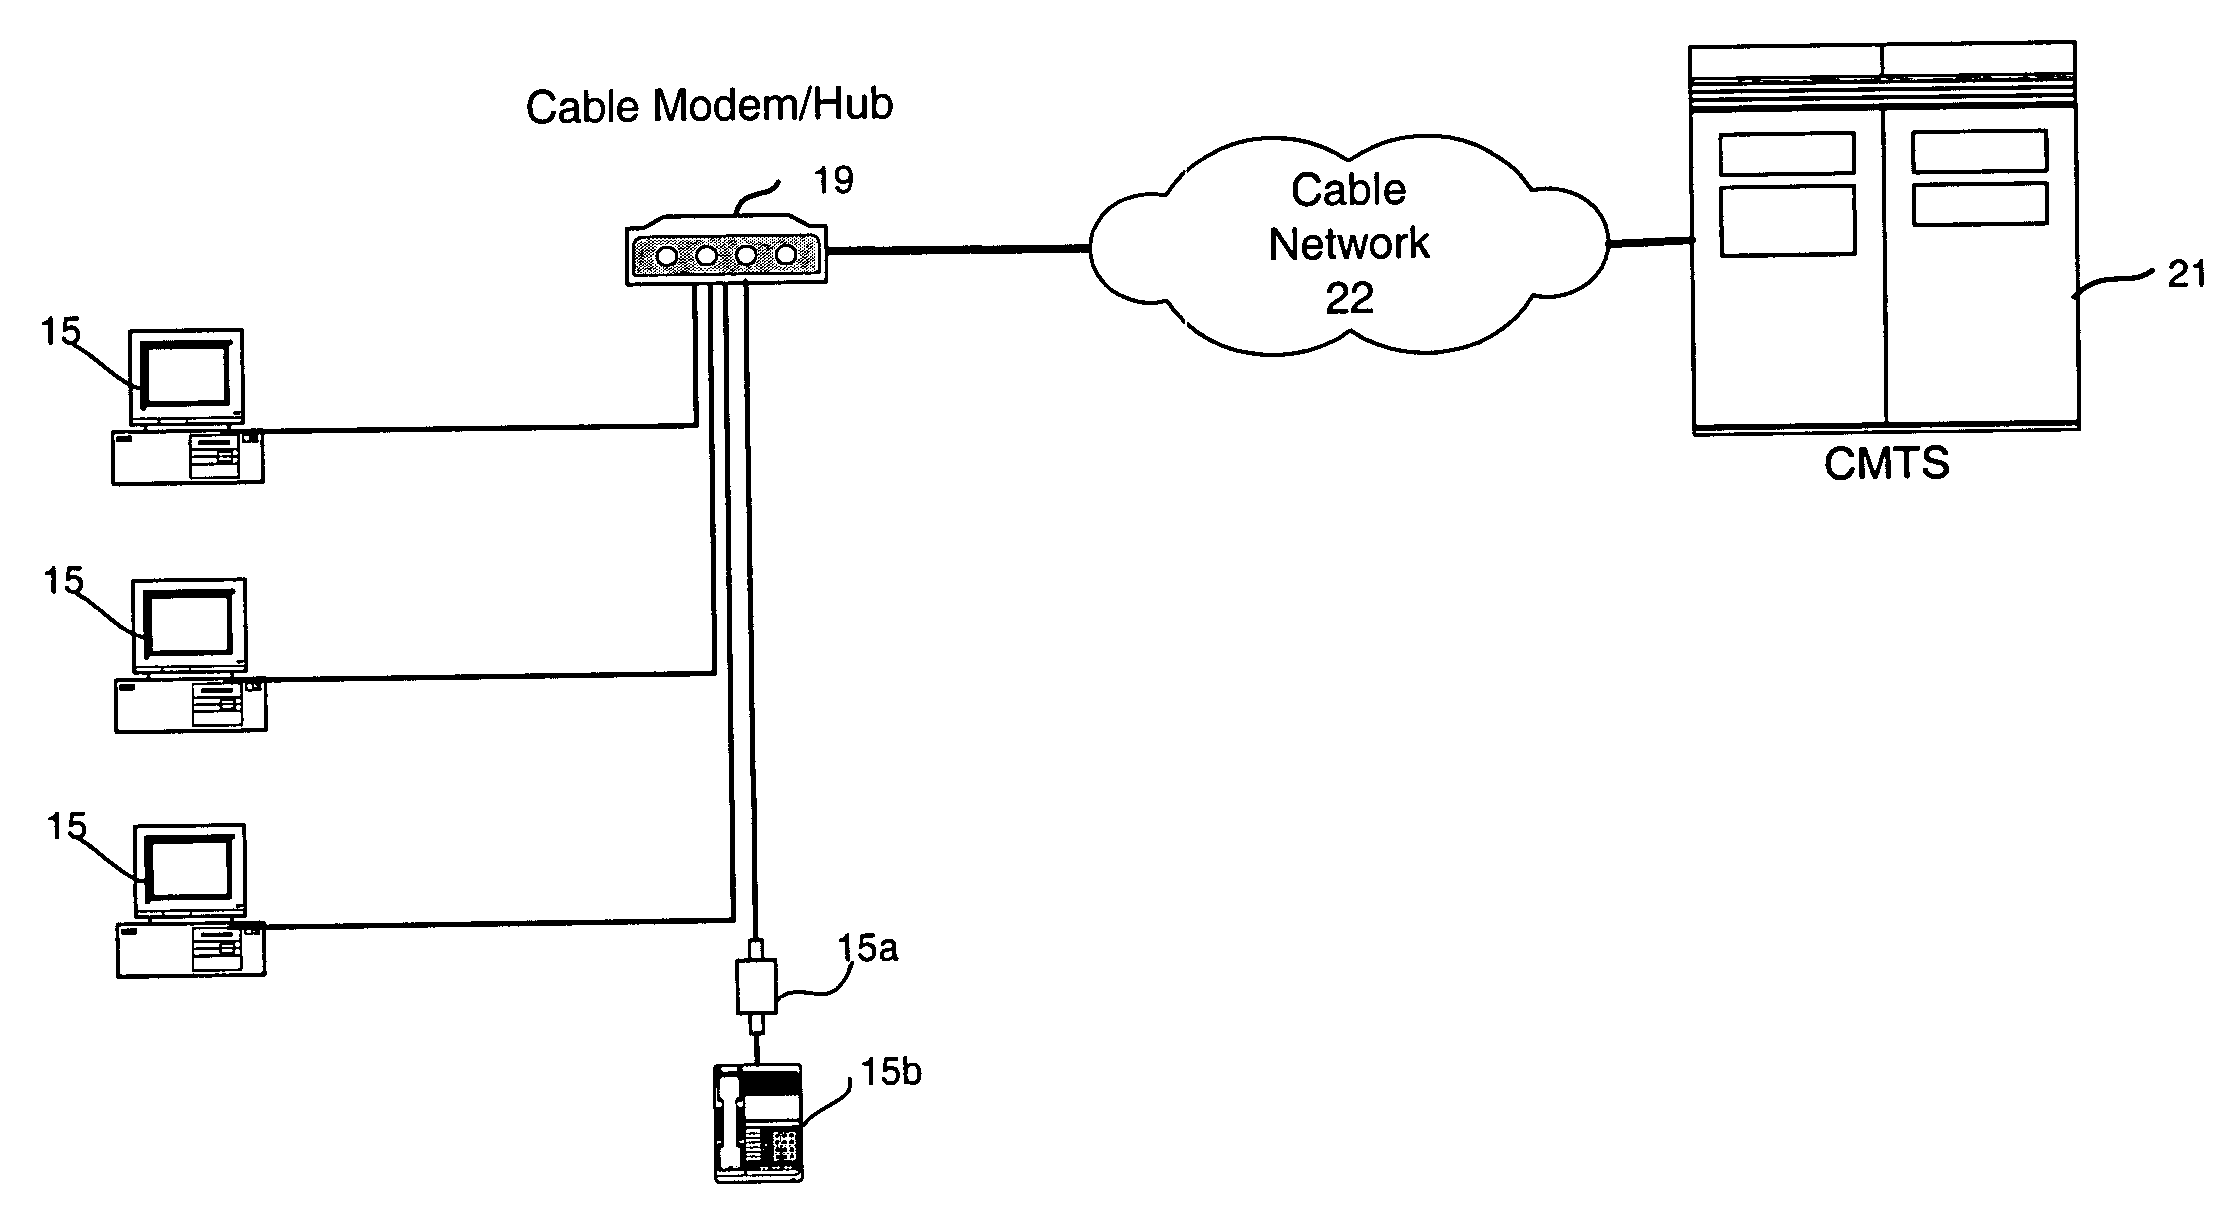 Method to block unauthorized network traffic in a cable data network